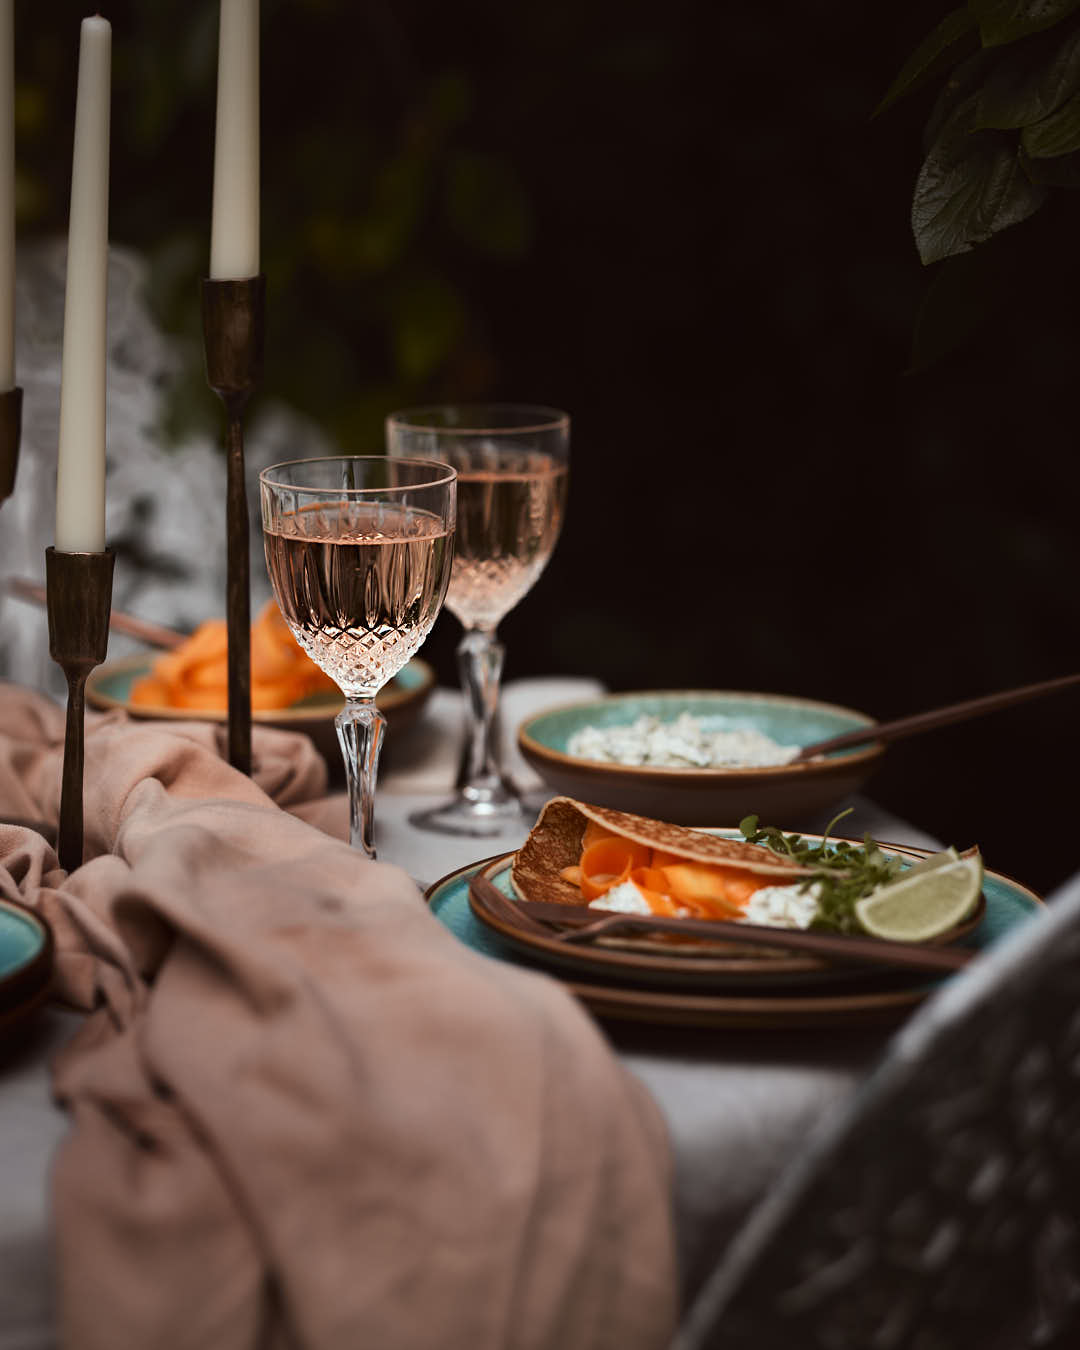 What a Host Home: antique gold brass candle holders, green porcelain plates and blows blended with touches of earth tones, washed linen table textiles (natural material tablecloths and linen napkins) and gold rose cutlery sets.